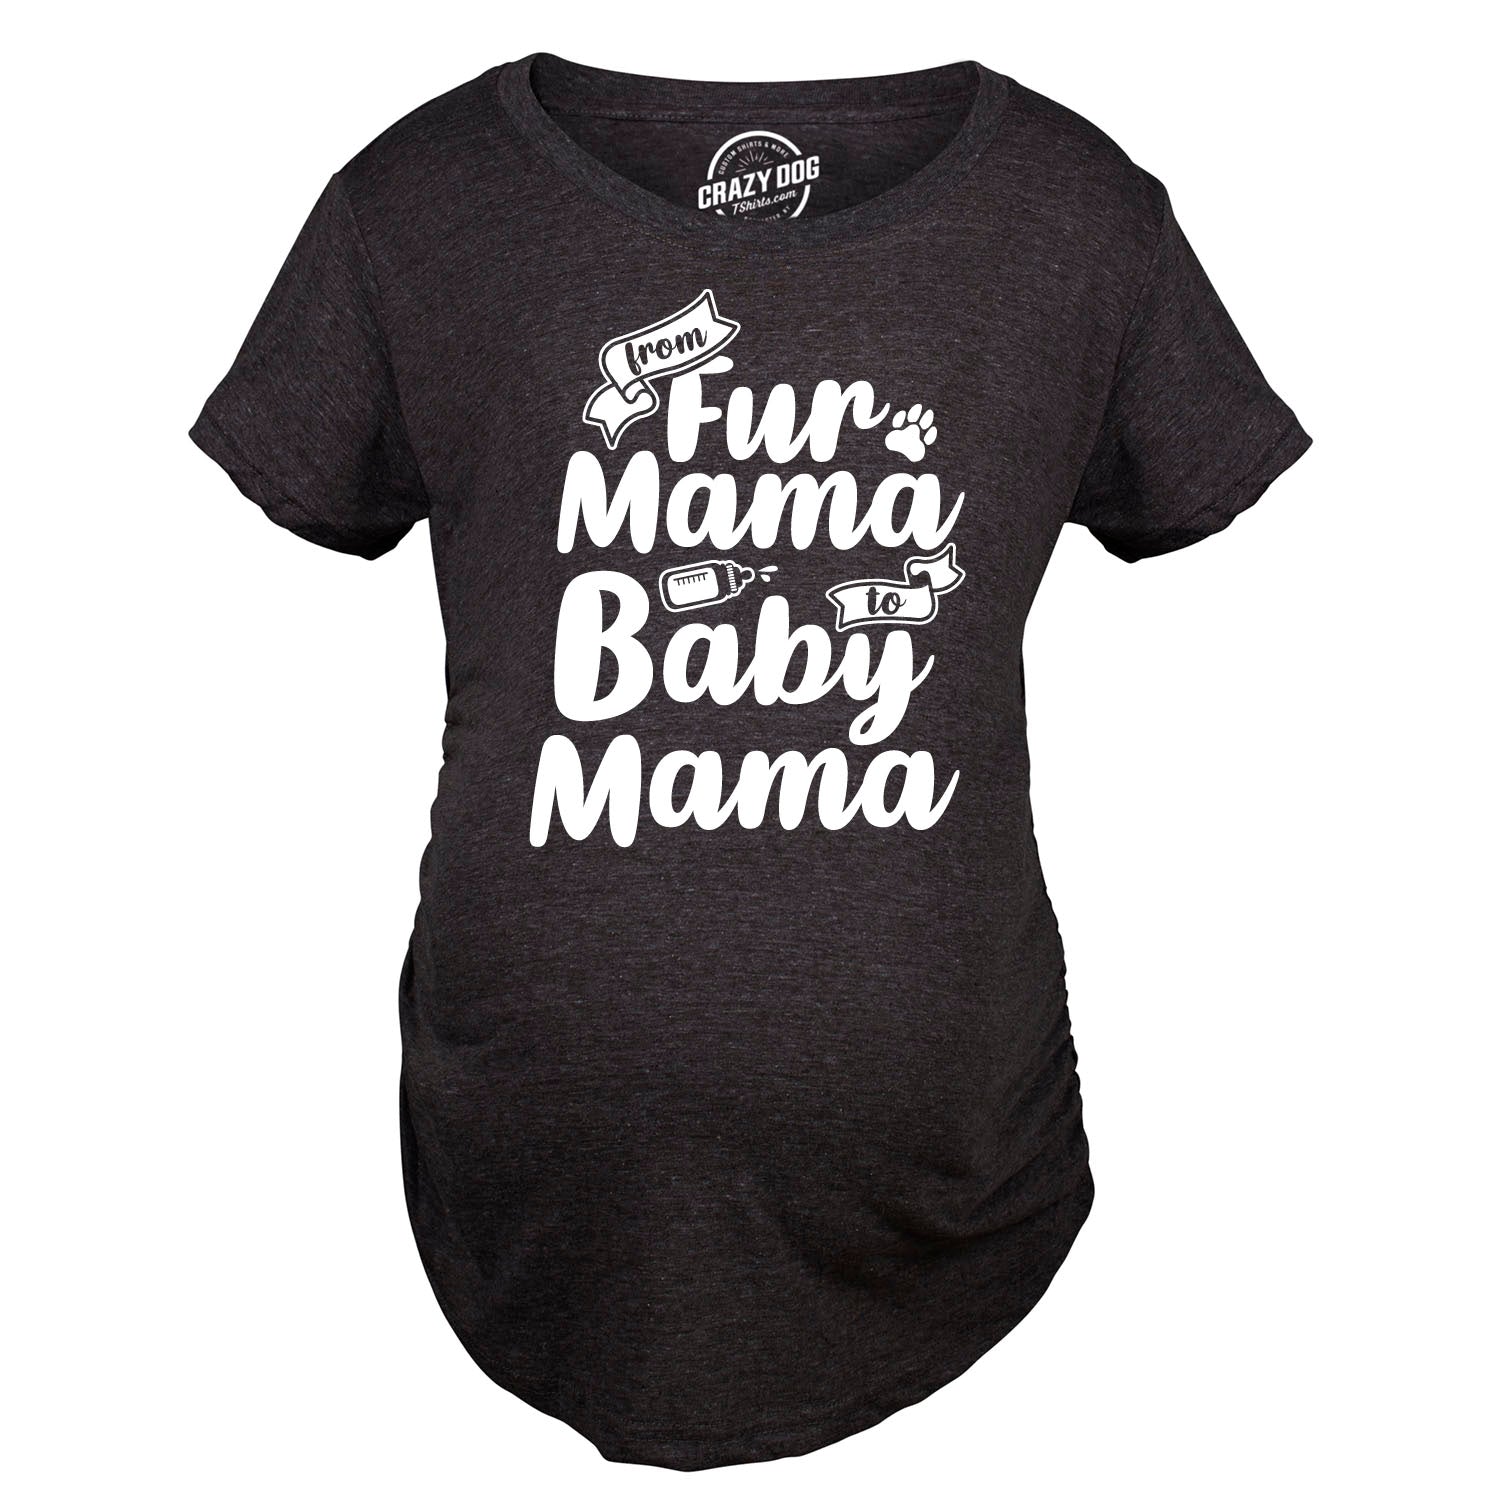 Funny Pregnancy Expecting Shirts For Young Mothers - Off The